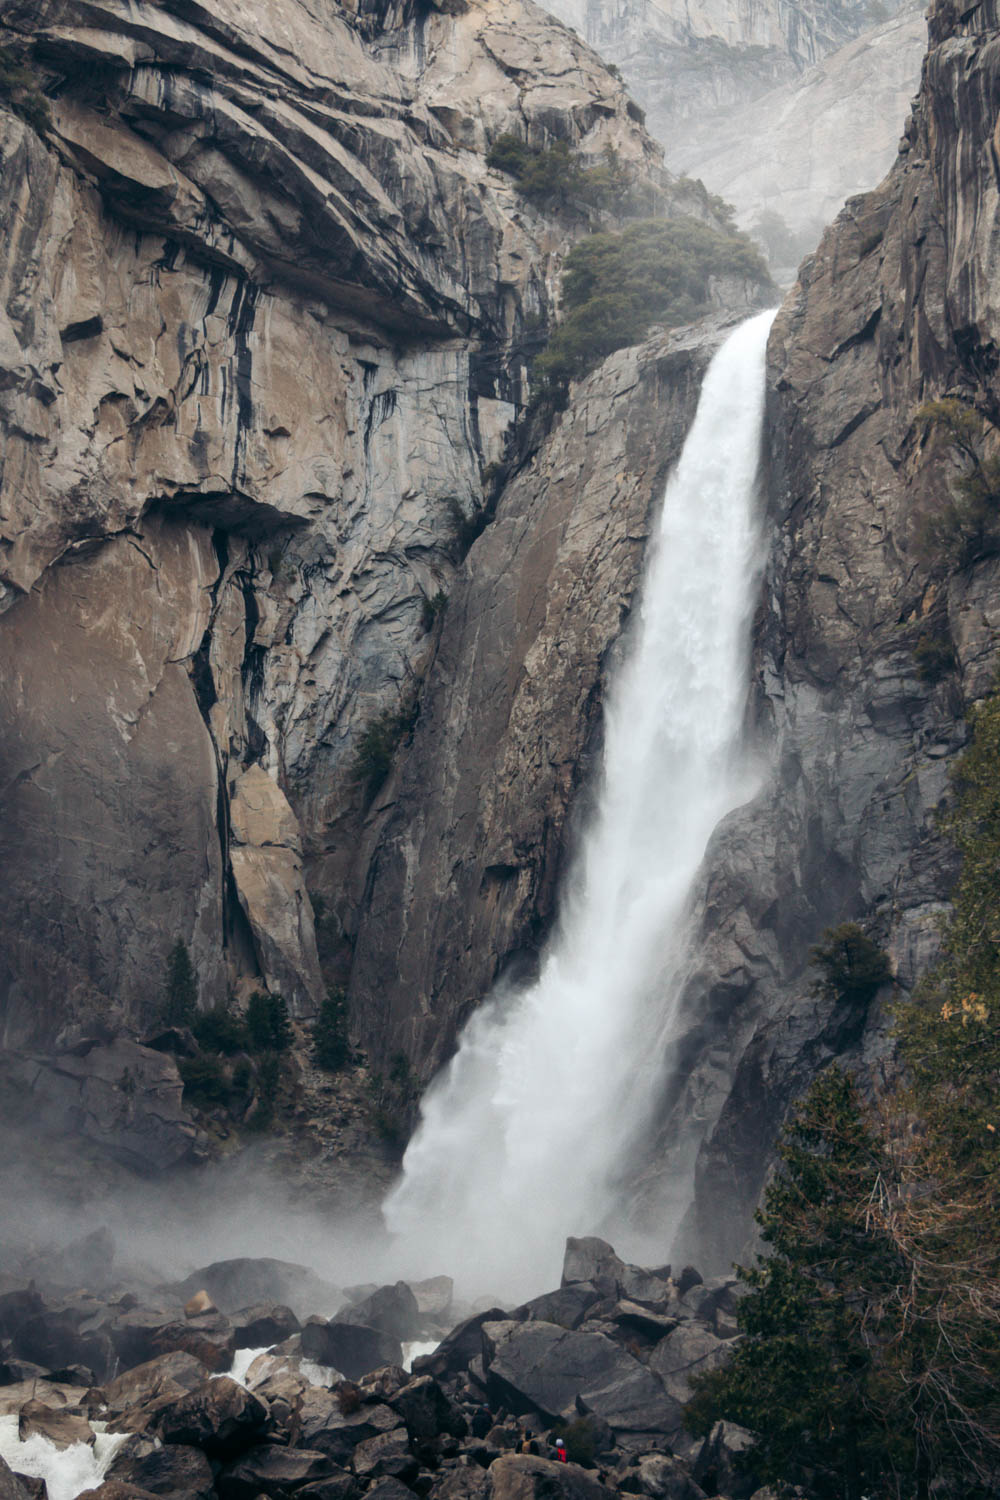 Things to do in Yosemite with kids - Roads and Destinations.